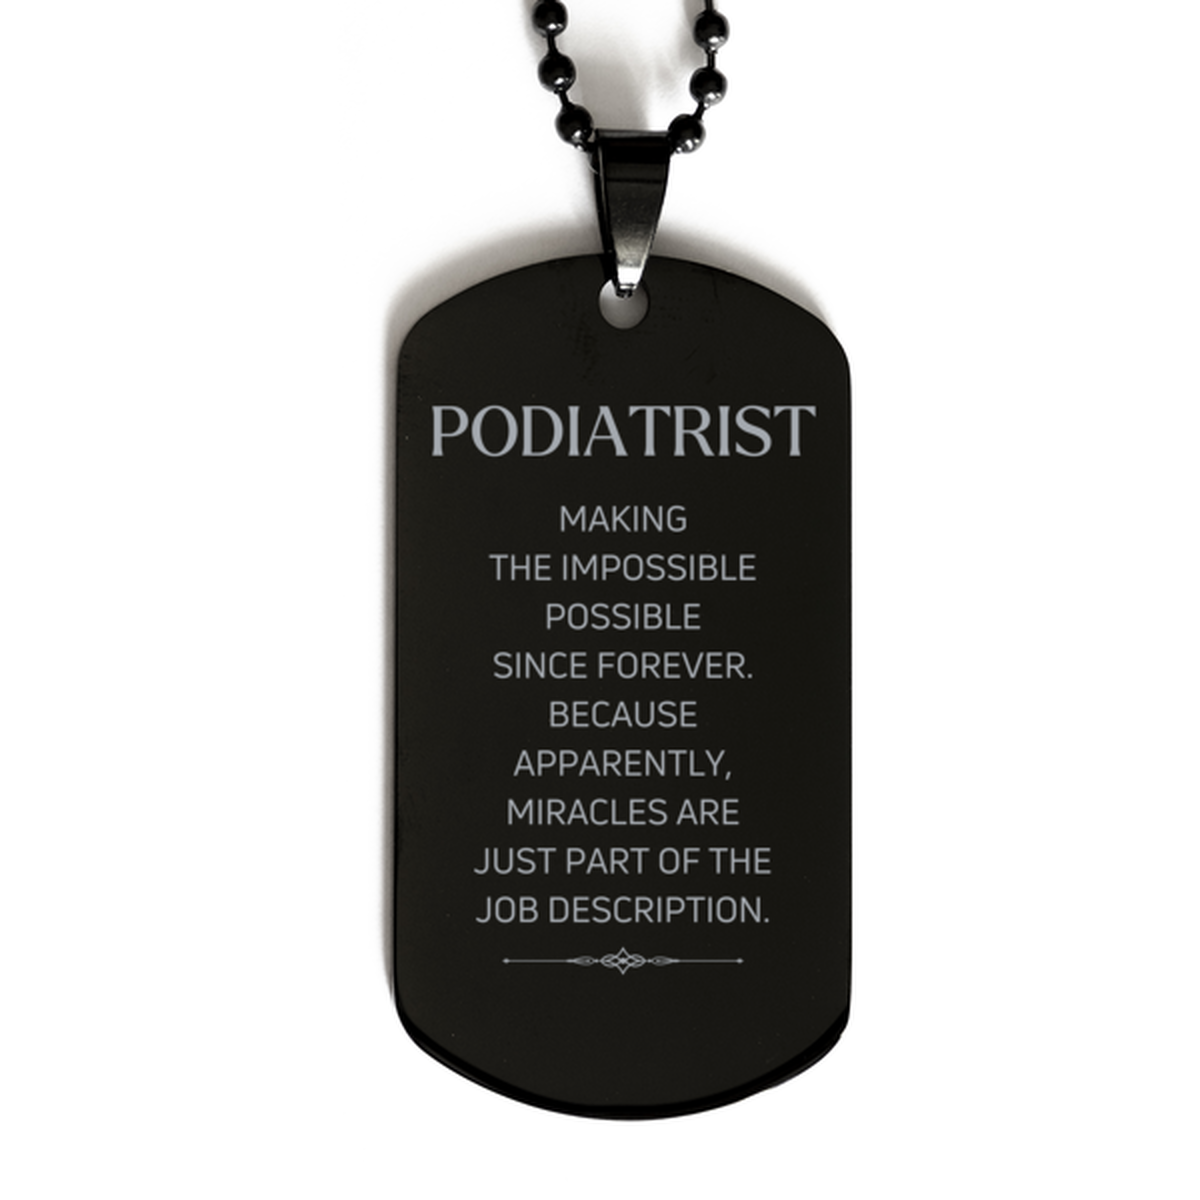 Funny Podiatrist Gifts, Miracles are just part of the job description, Inspirational Birthday Black Dog Tag For Podiatrist, Men, Women, Coworkers, Friends, Boss